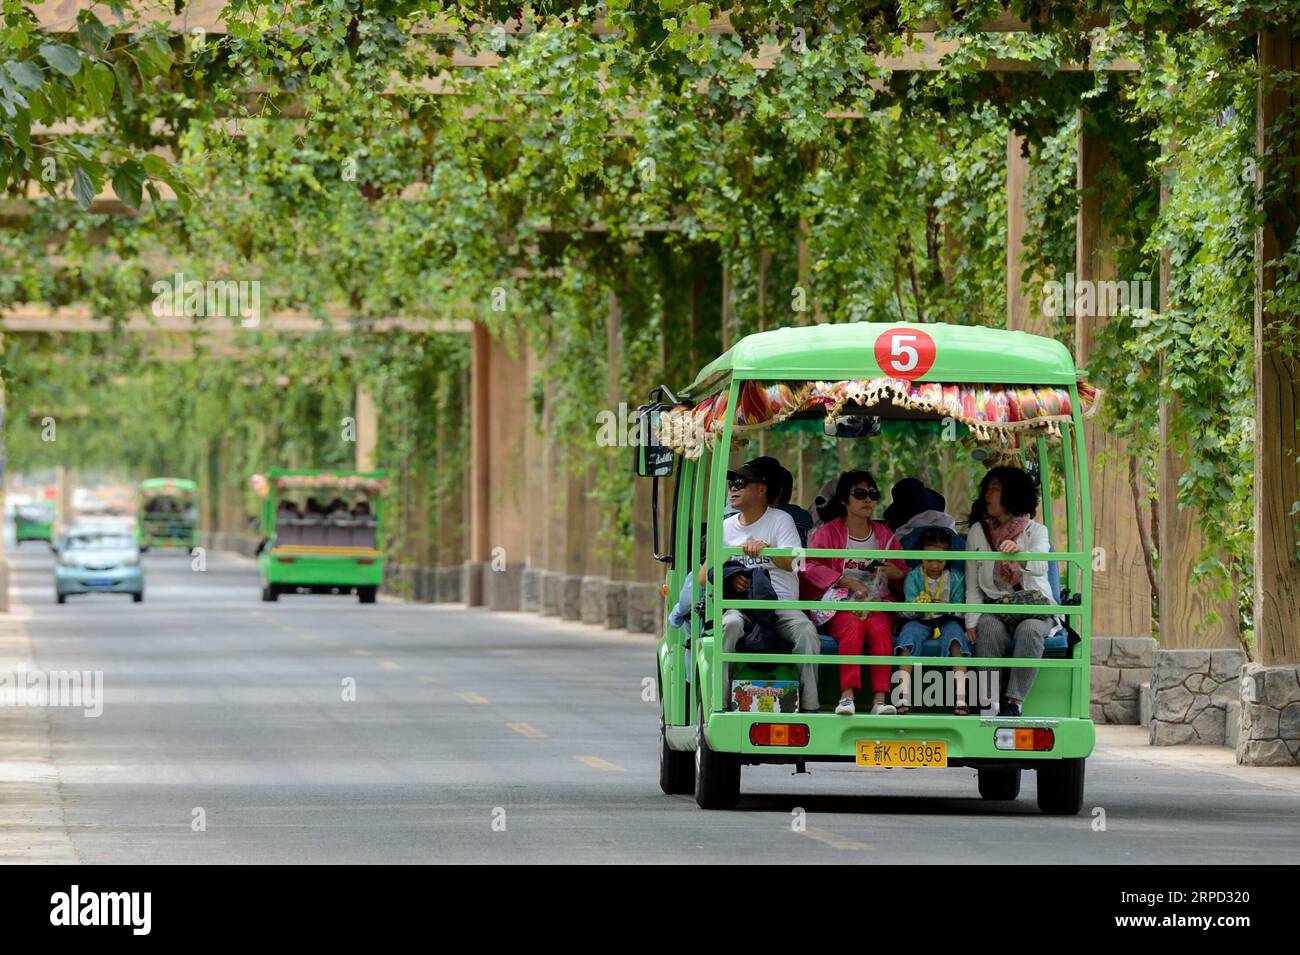 (190720) -- TURPAN, July 20, 2019 -- Tourists visit the Grape Valley scenic area by tour bus in Turpan, northwest China s Xinjiang Uygur Autonomous Region, July 20, 2019. Turpan has entered its peak tourism season recently. The city saw nearly 8.59 million tourist arrivals in the first half of 2019, up by 91.84 percent over the same period last year. ) CHINA-XINJIANG-TURPAN-TOURISM (CN) DingxLei PUBLICATIONxNOTxINxCHN Stock Photo